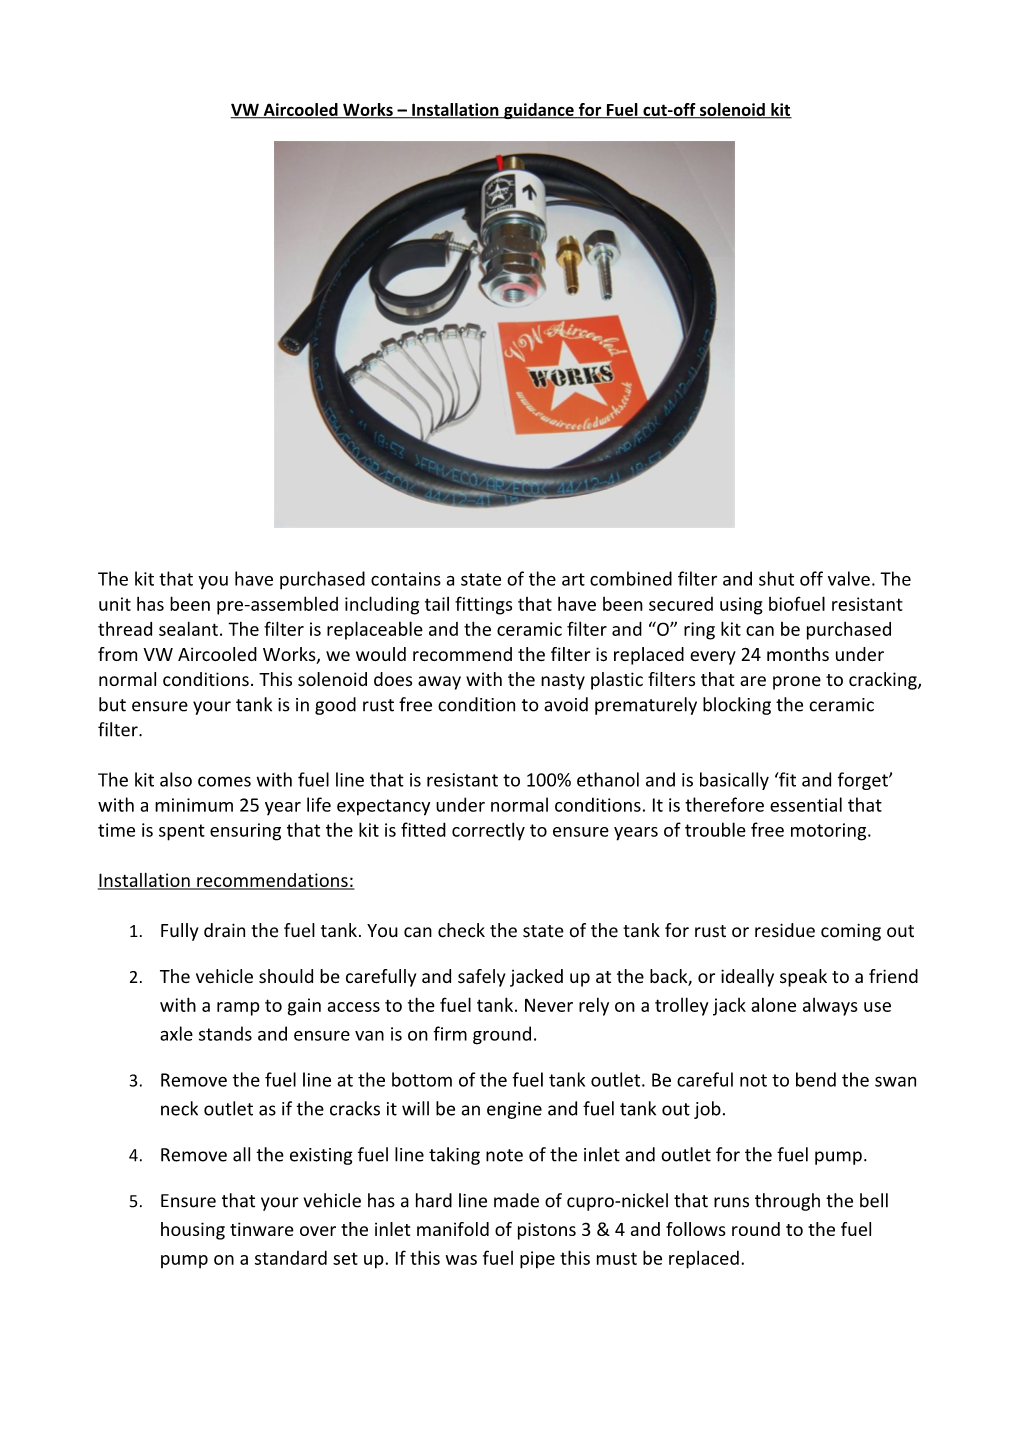 VW Aircooled Works Installation Guidance for Fuel Cut-Off Solenoid Kit